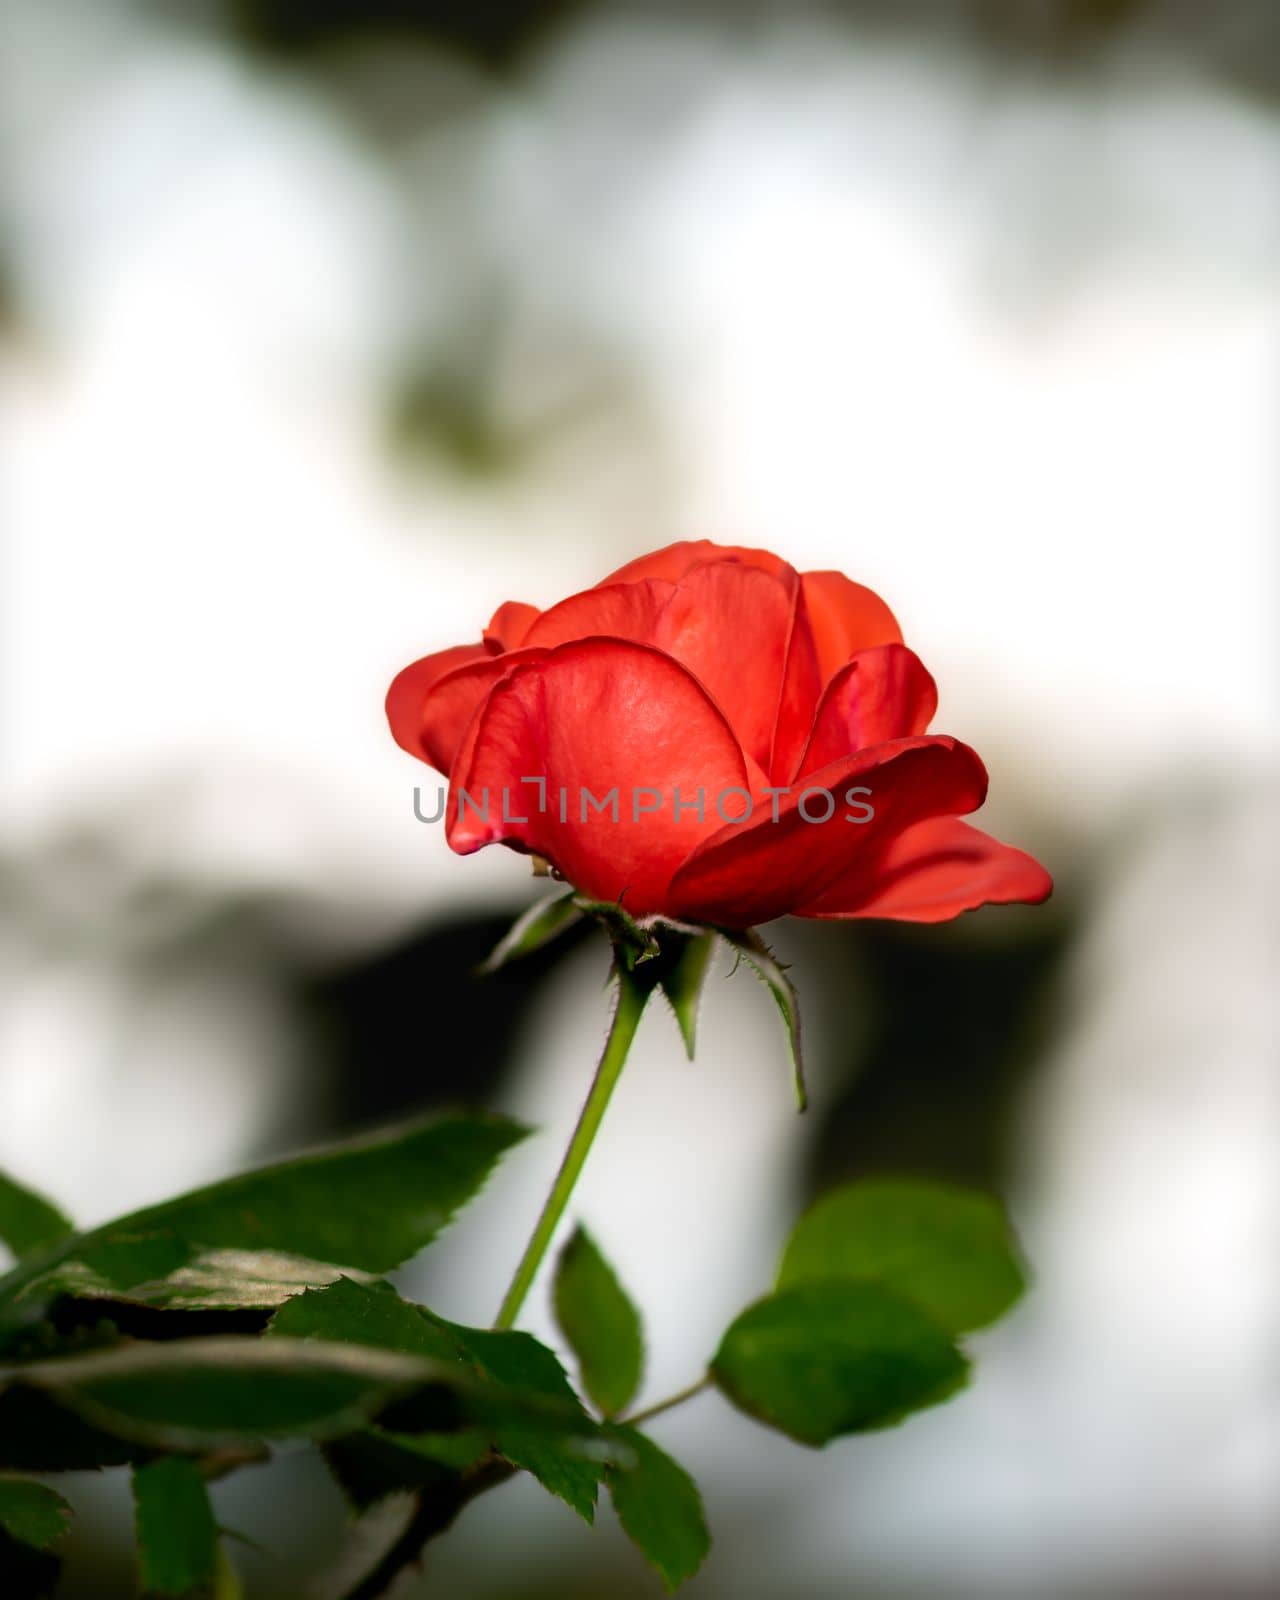 Red rose flower on blurred background, close-up photo of red rose flower